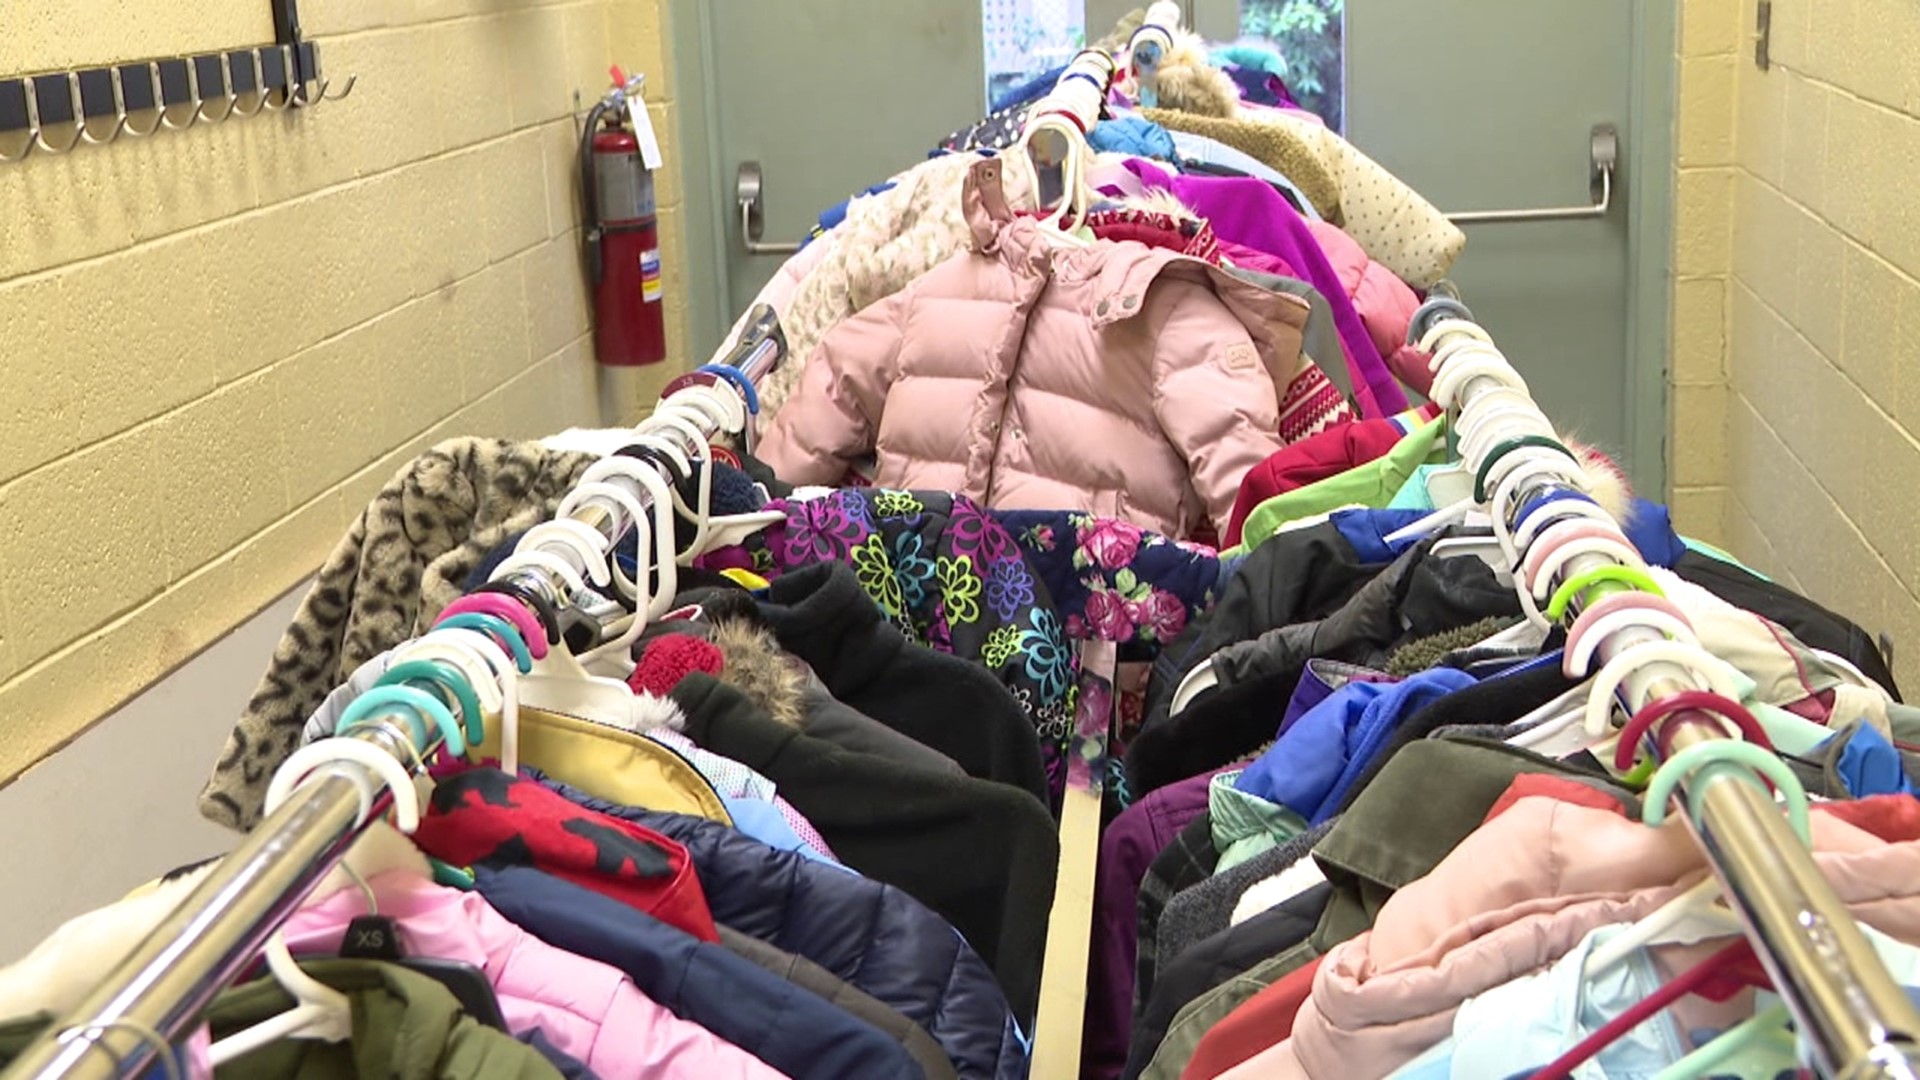 Two organizations teamed up to help kids in Luzerne County stay warm this winter.